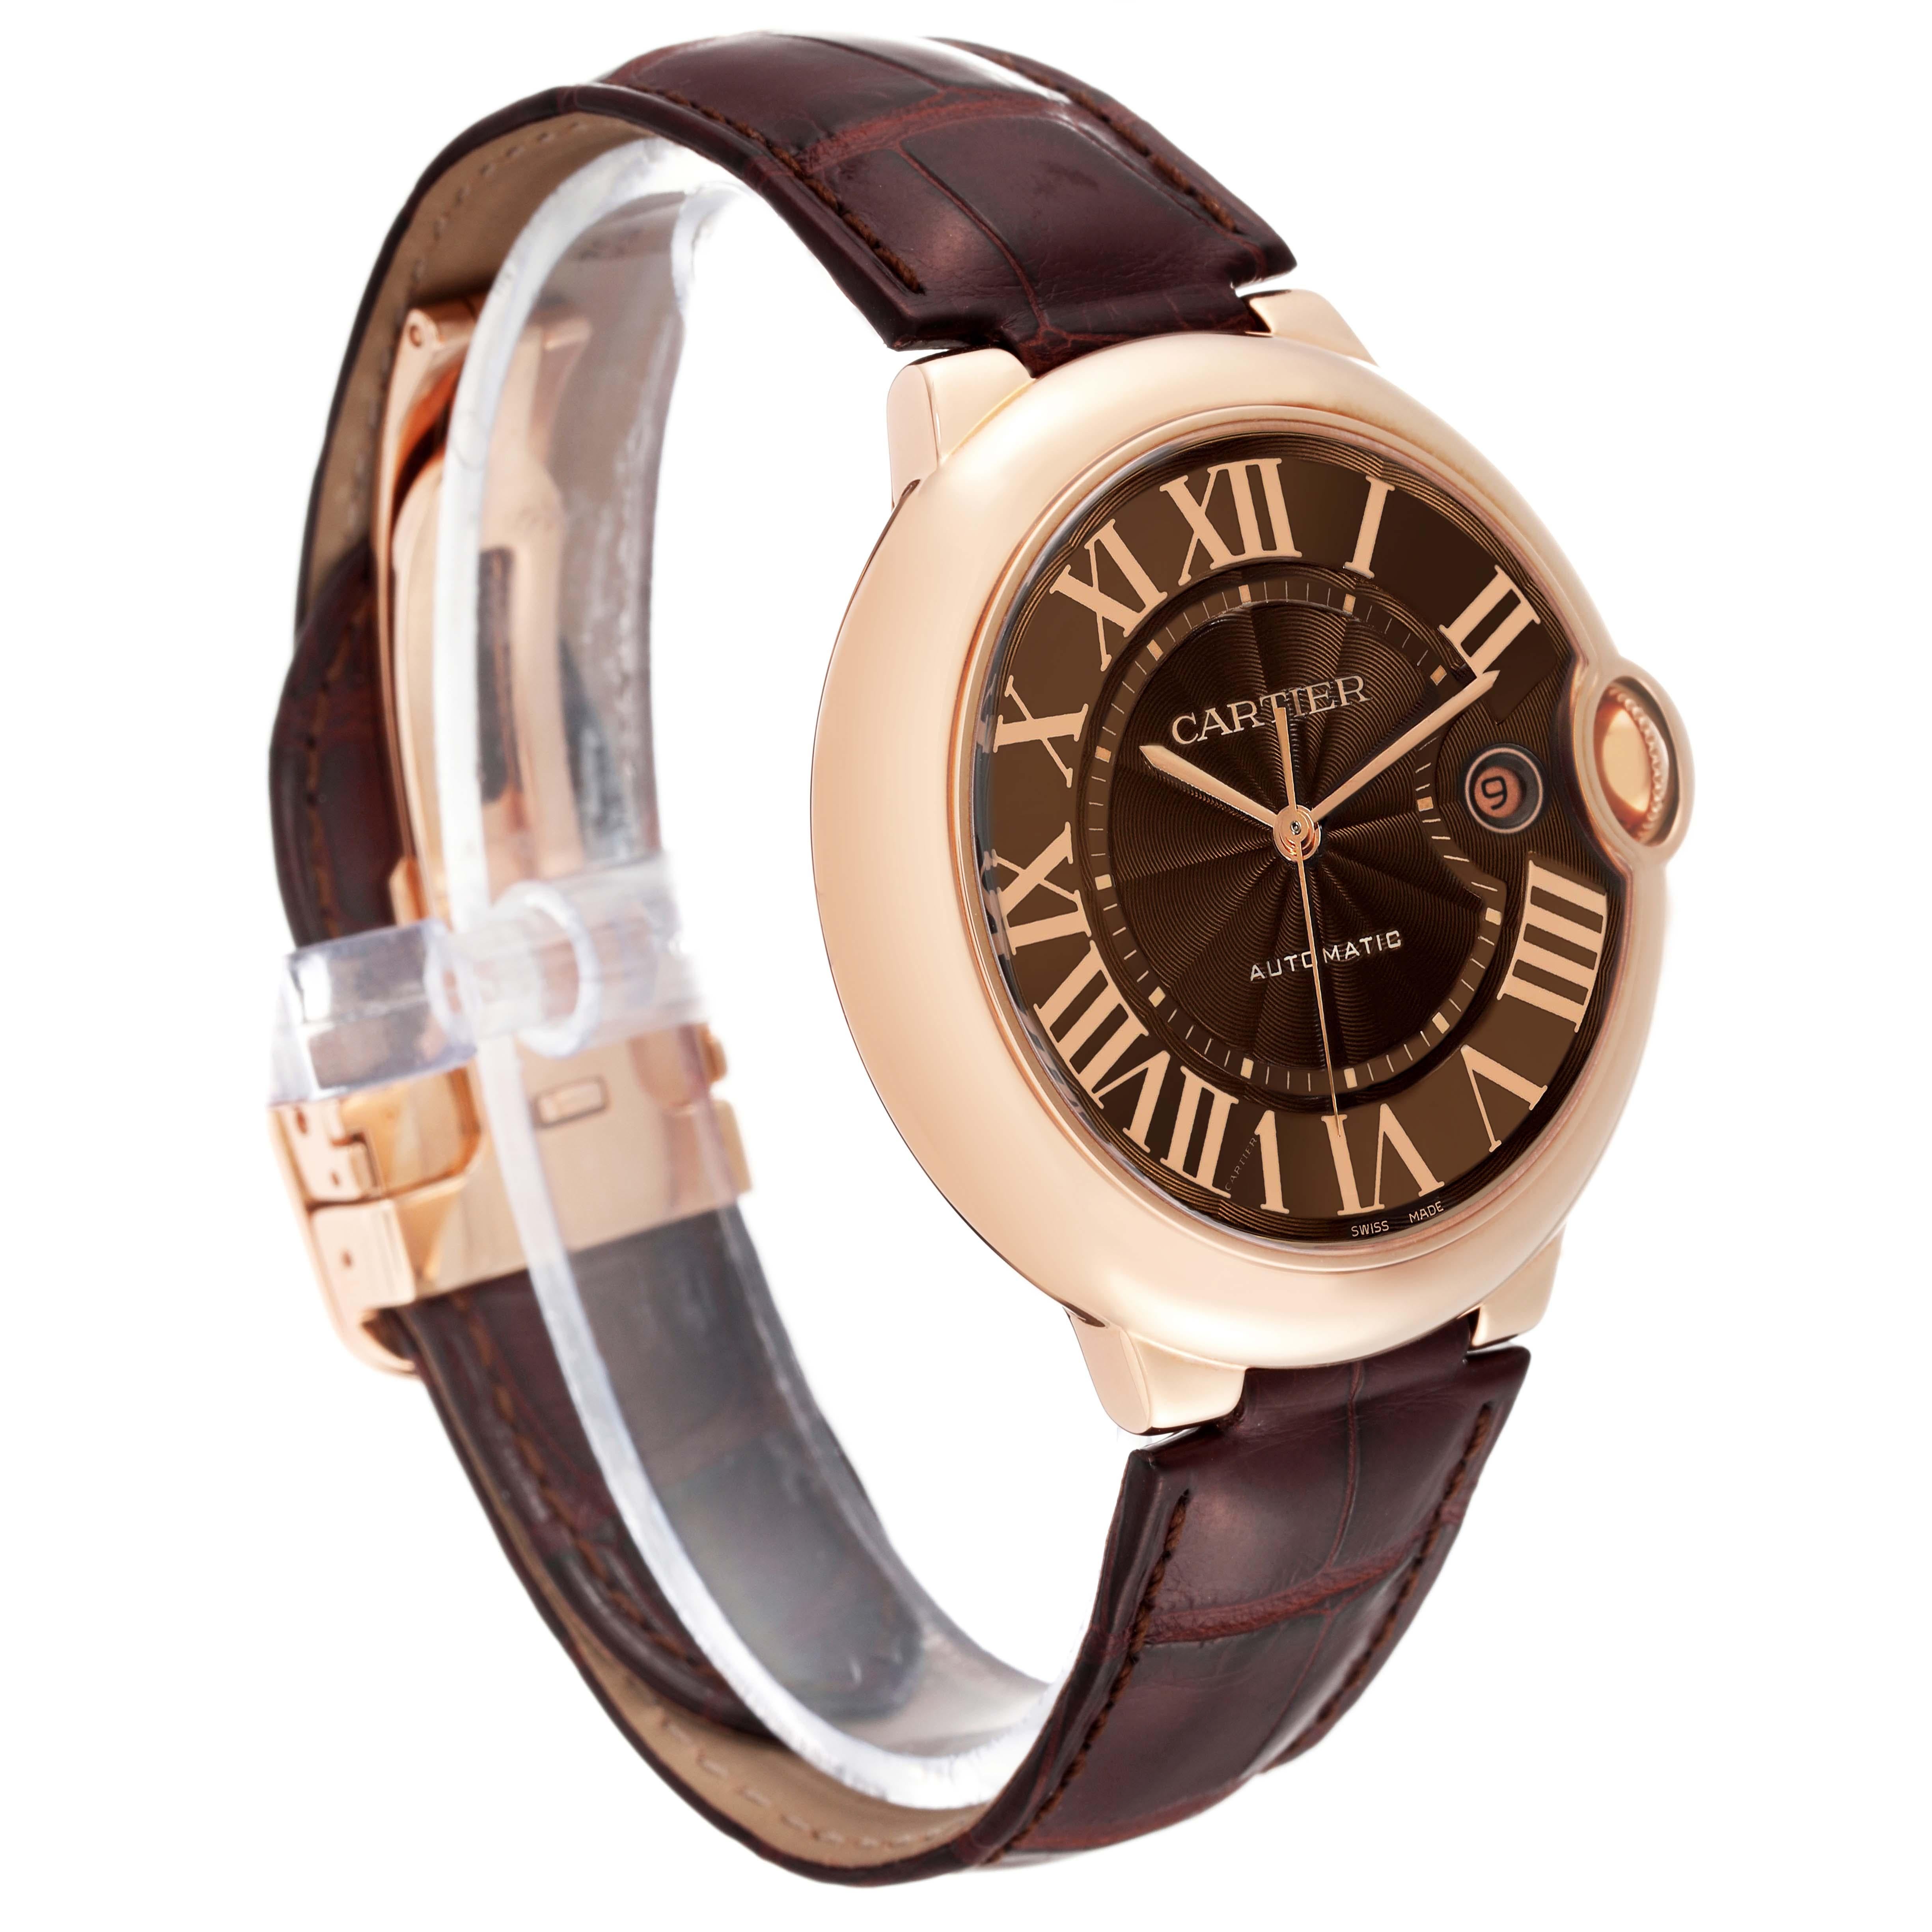 Cartier Ballon Bleu 42 mm Rose Gold Automatic Mens Watch W6920037 In Excellent Condition For Sale In Atlanta, GA